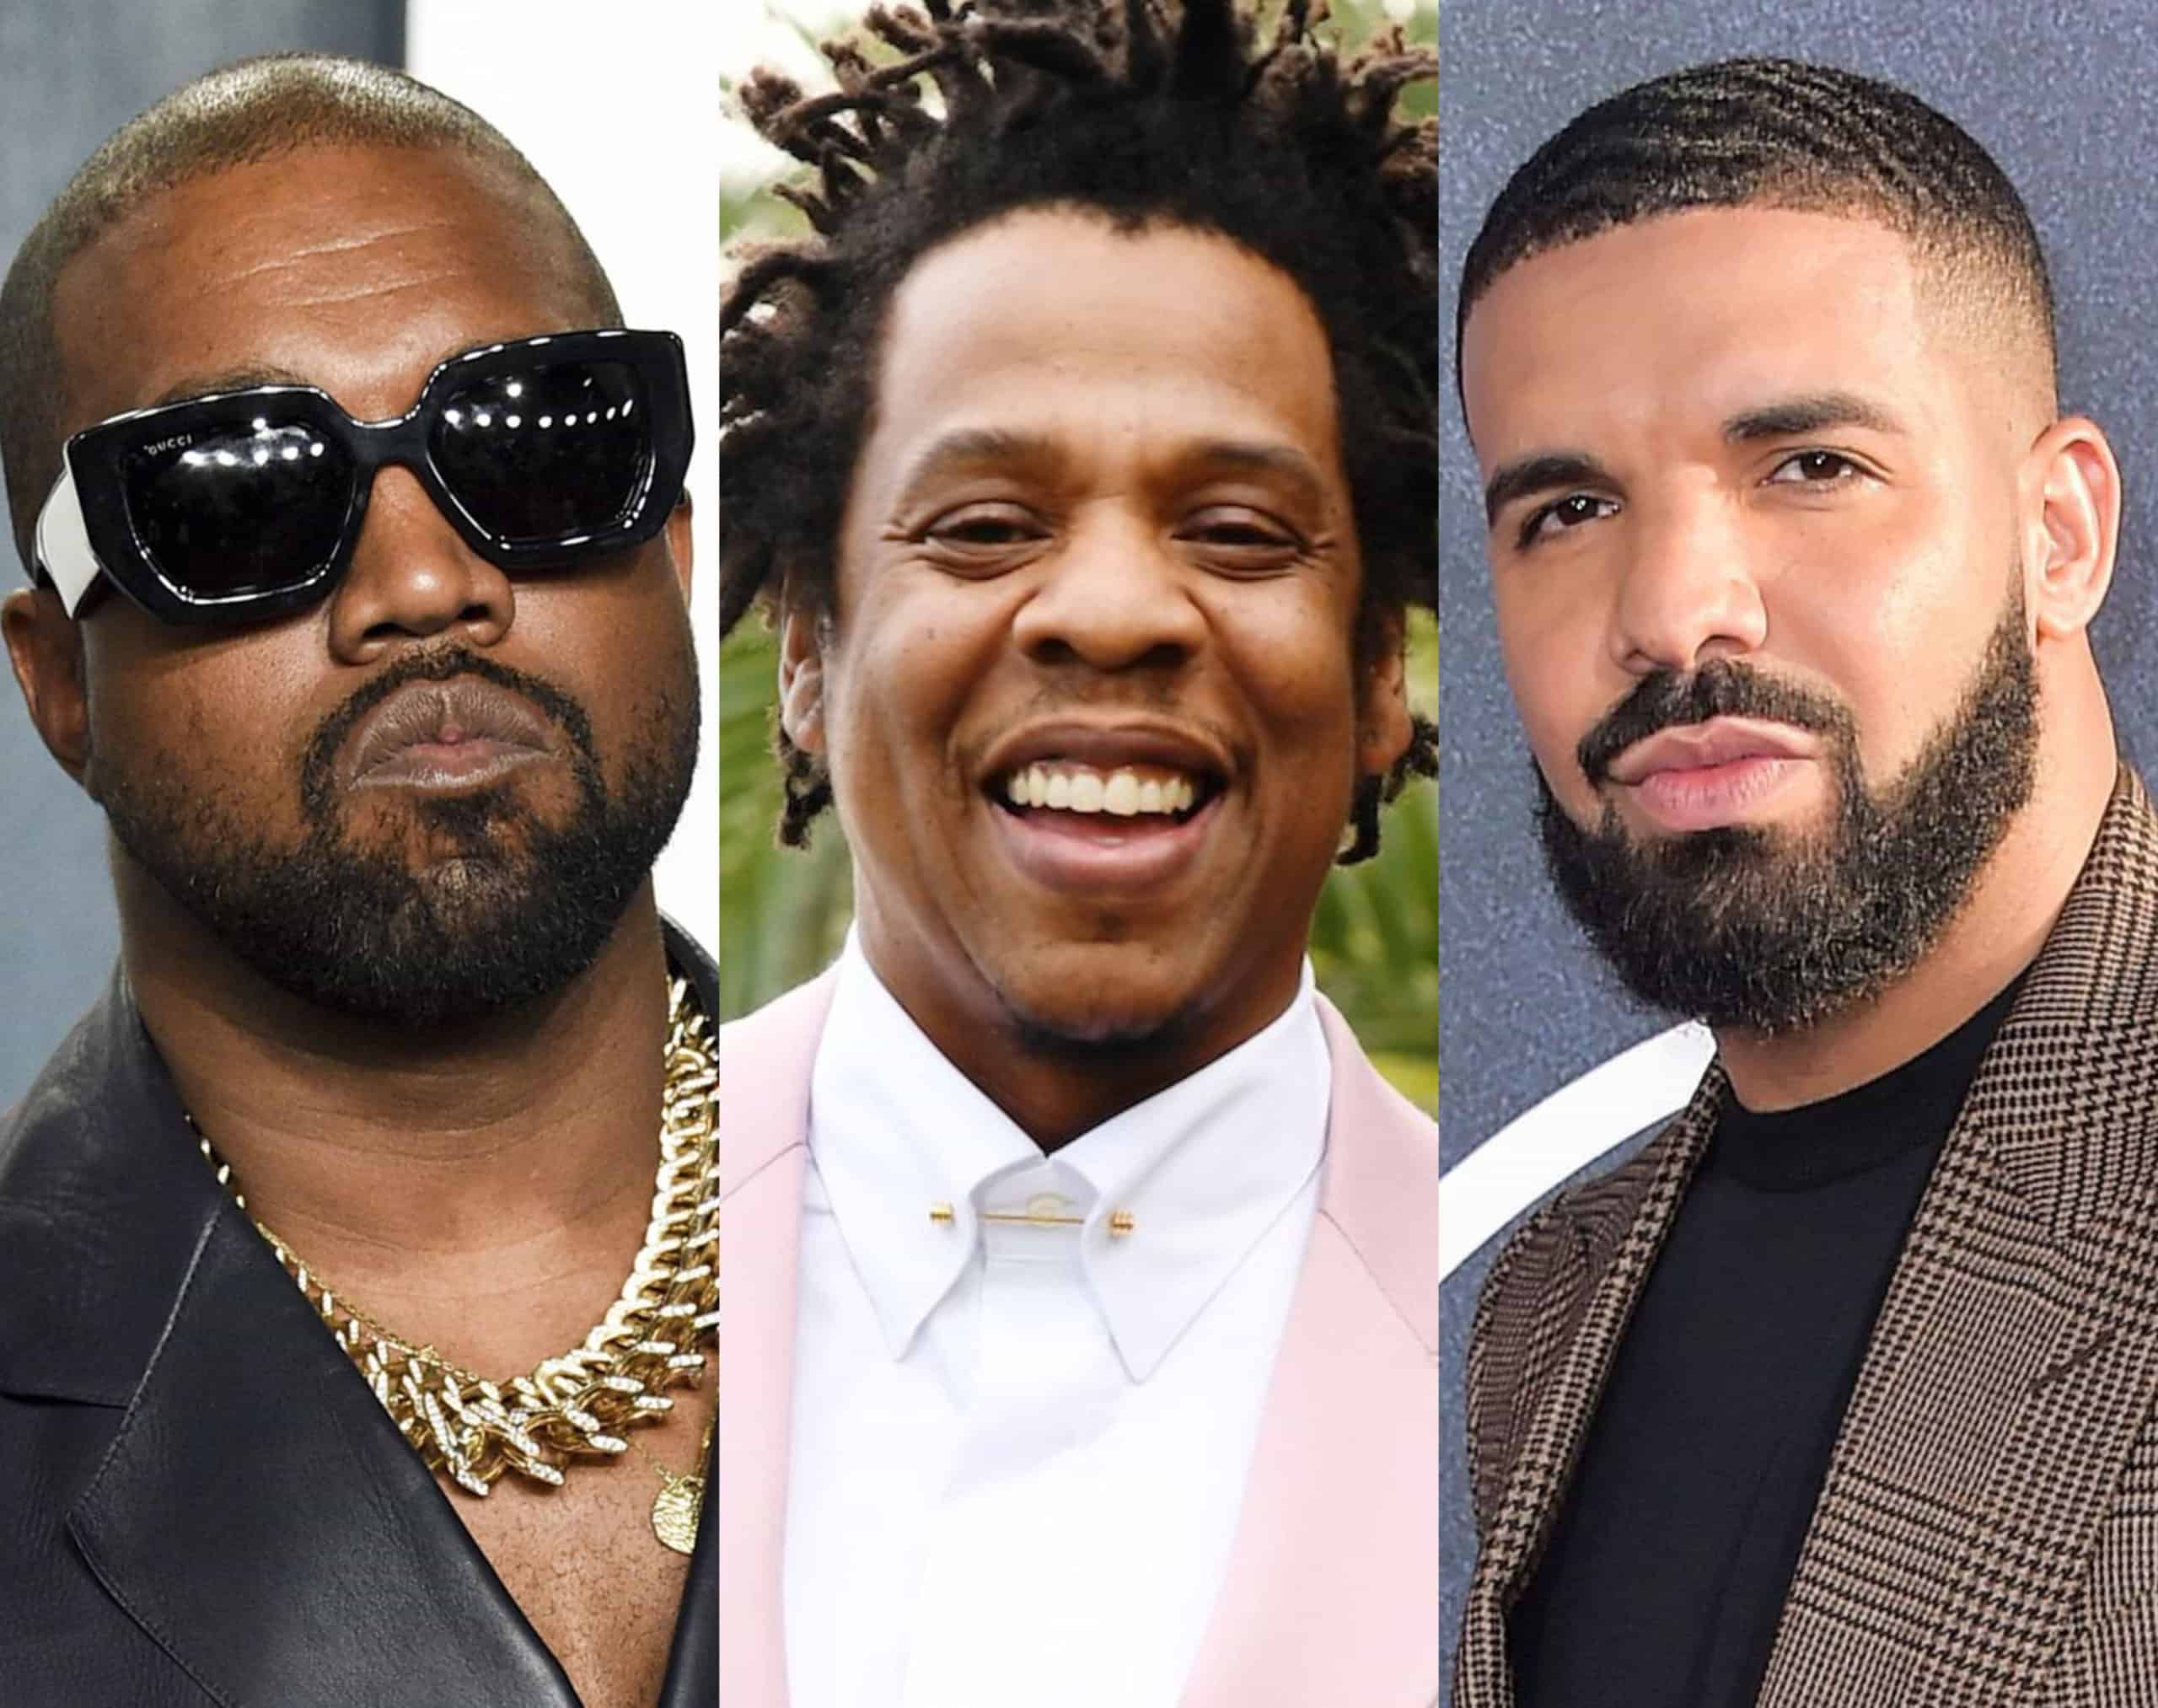 Kanye West Says Jay-Z & Drake Avoid Conversations To Make Him Look Crazy